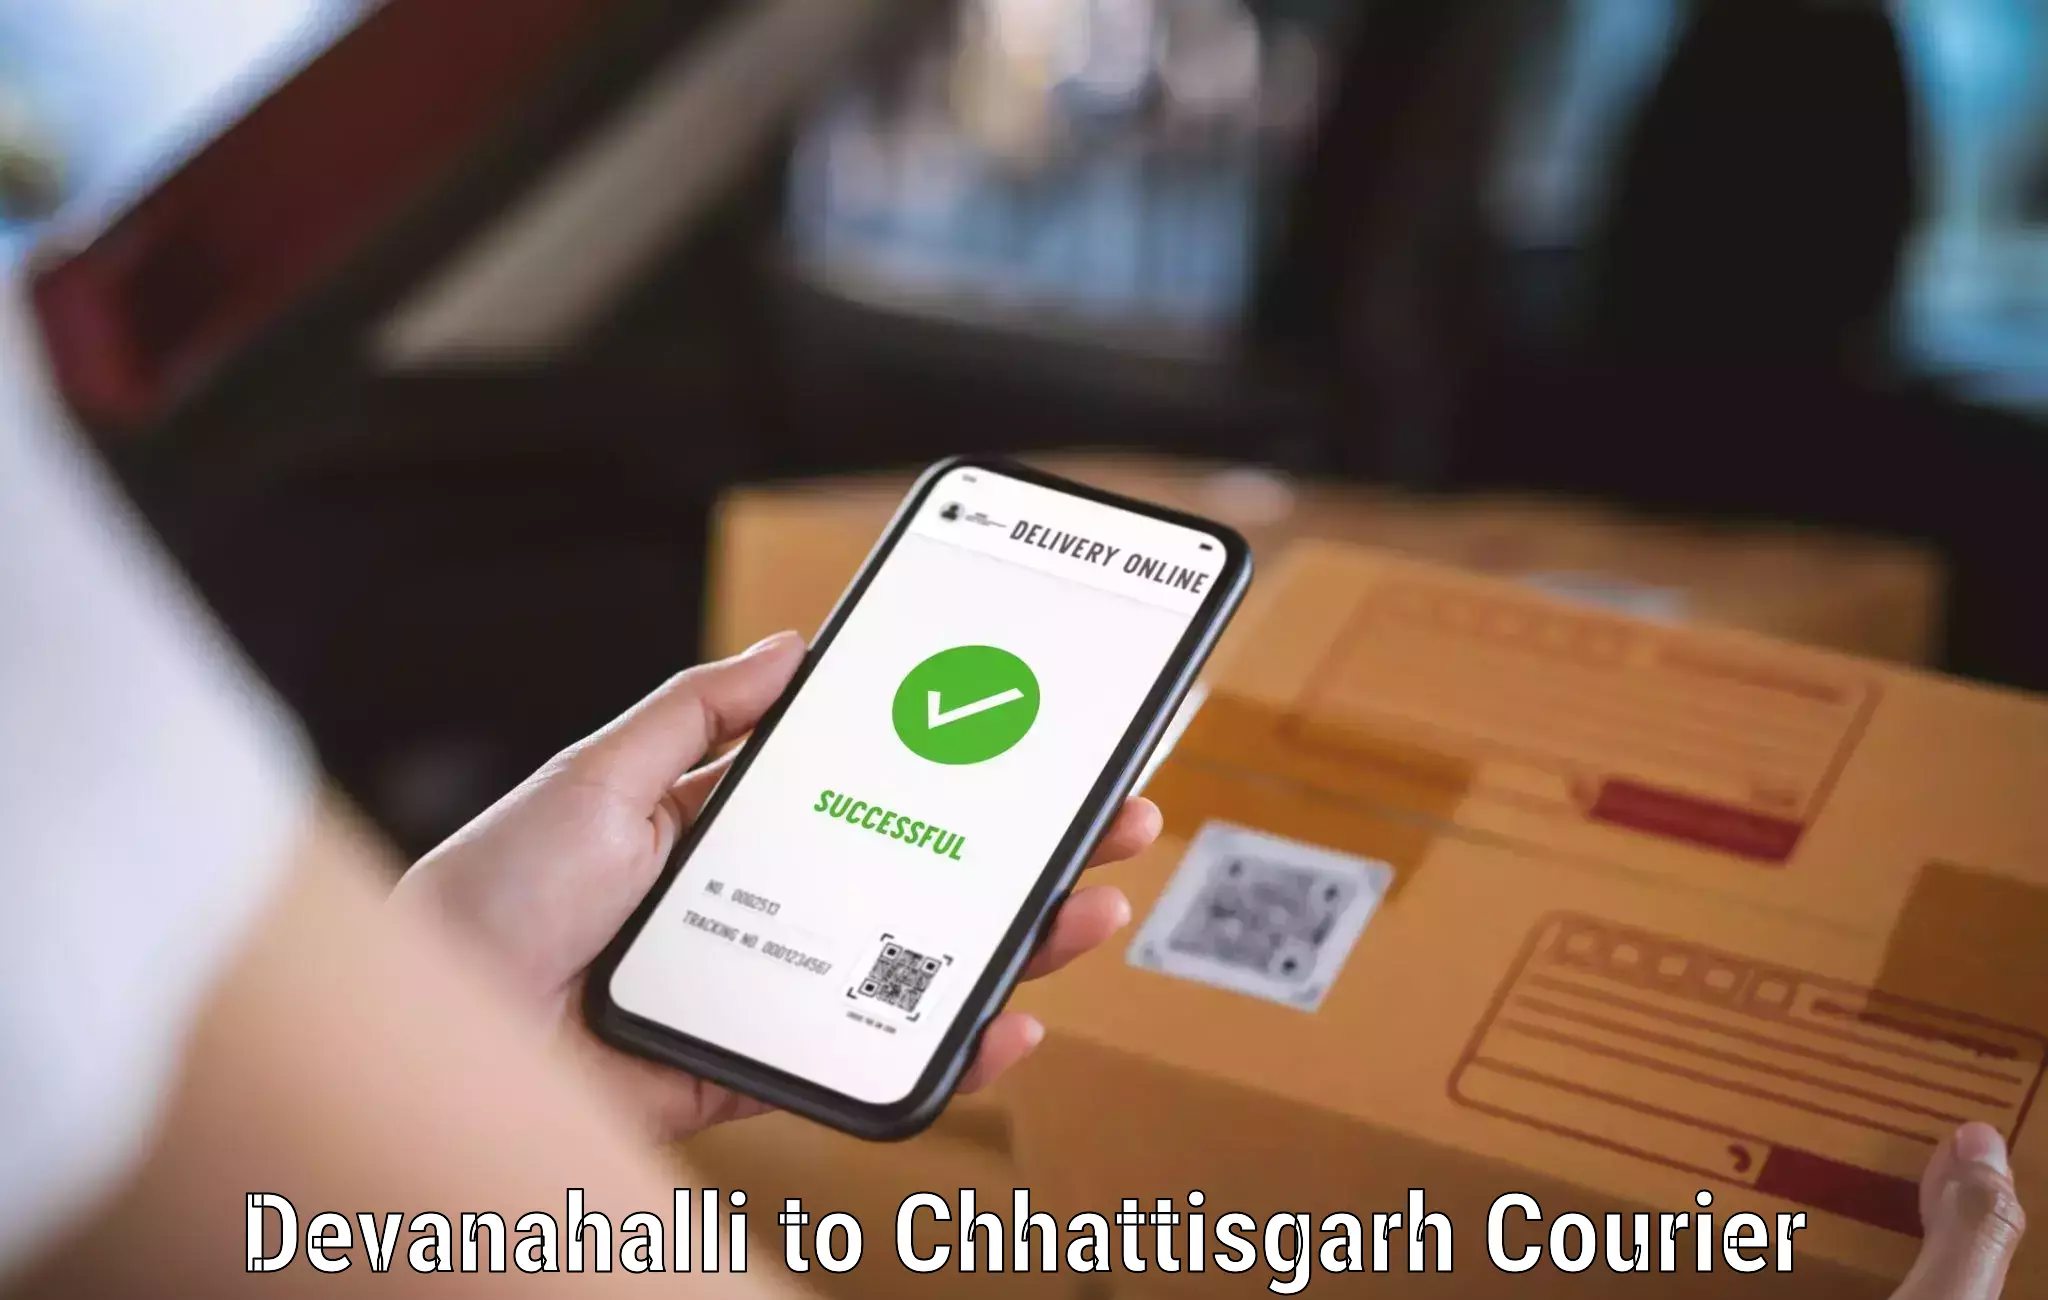 Courier service partnerships Devanahalli to bagbahra